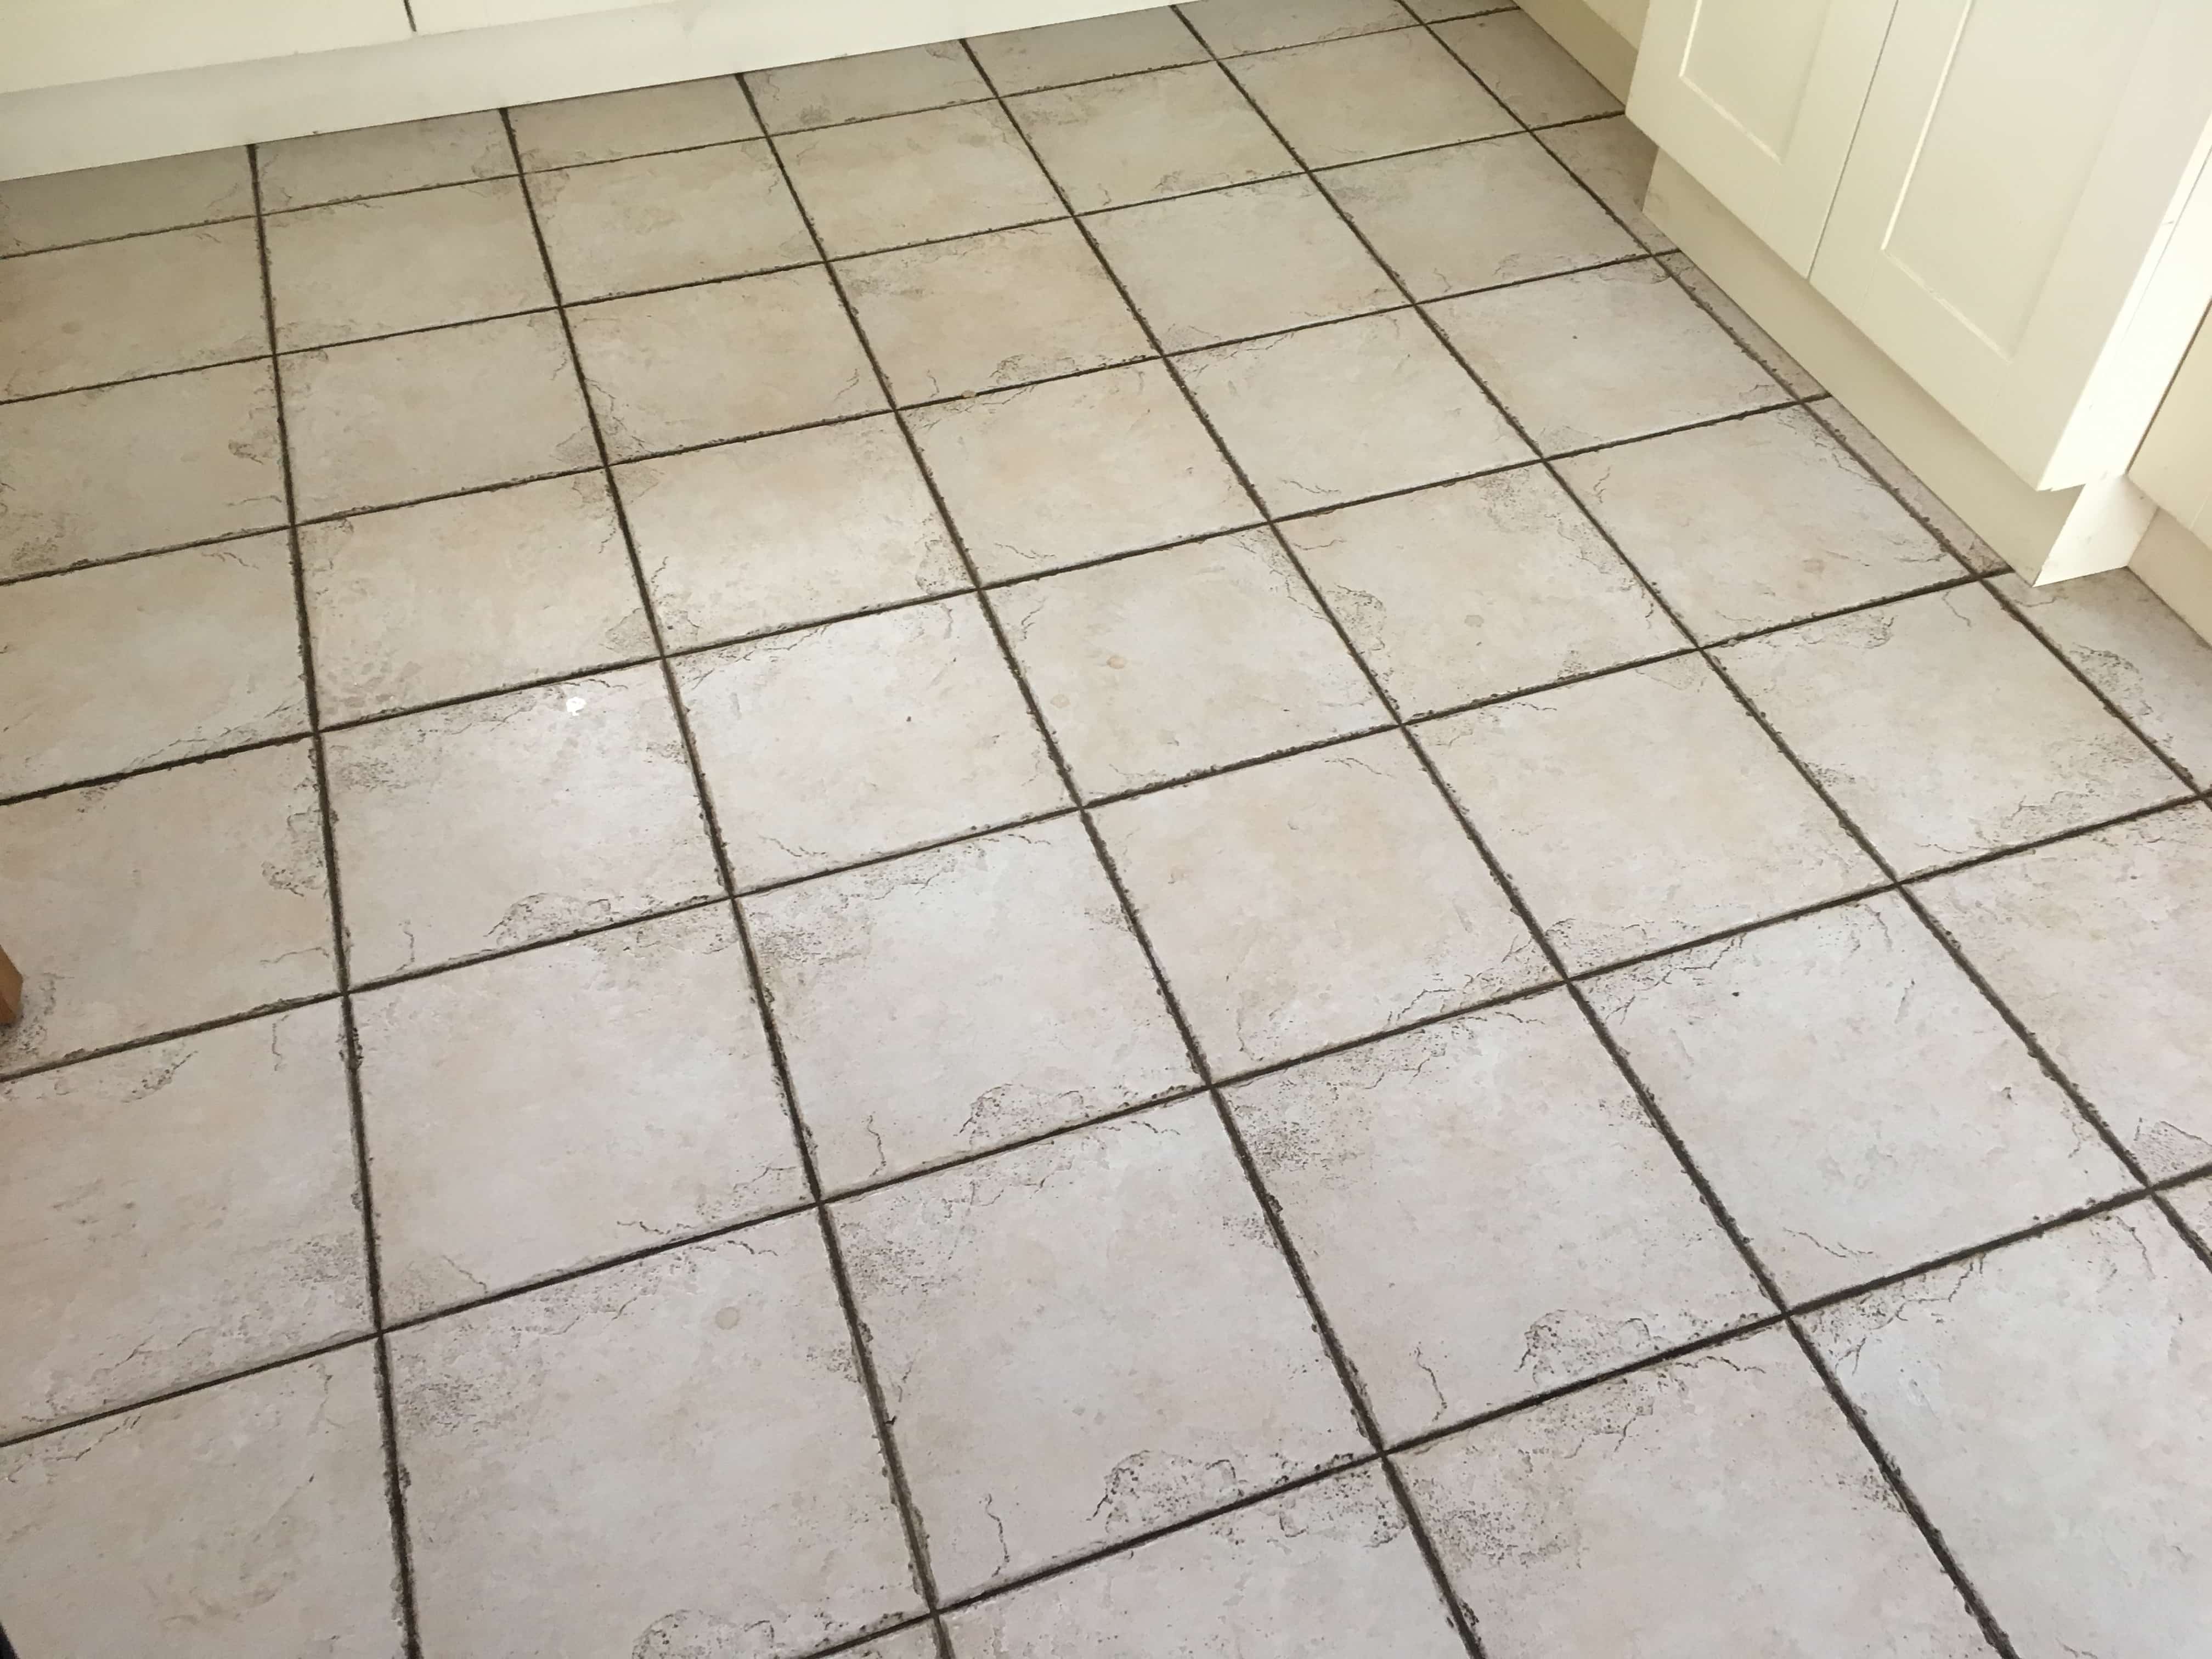 Ceramic Tile Grout Before Cleaning Leatherhead Kitchen